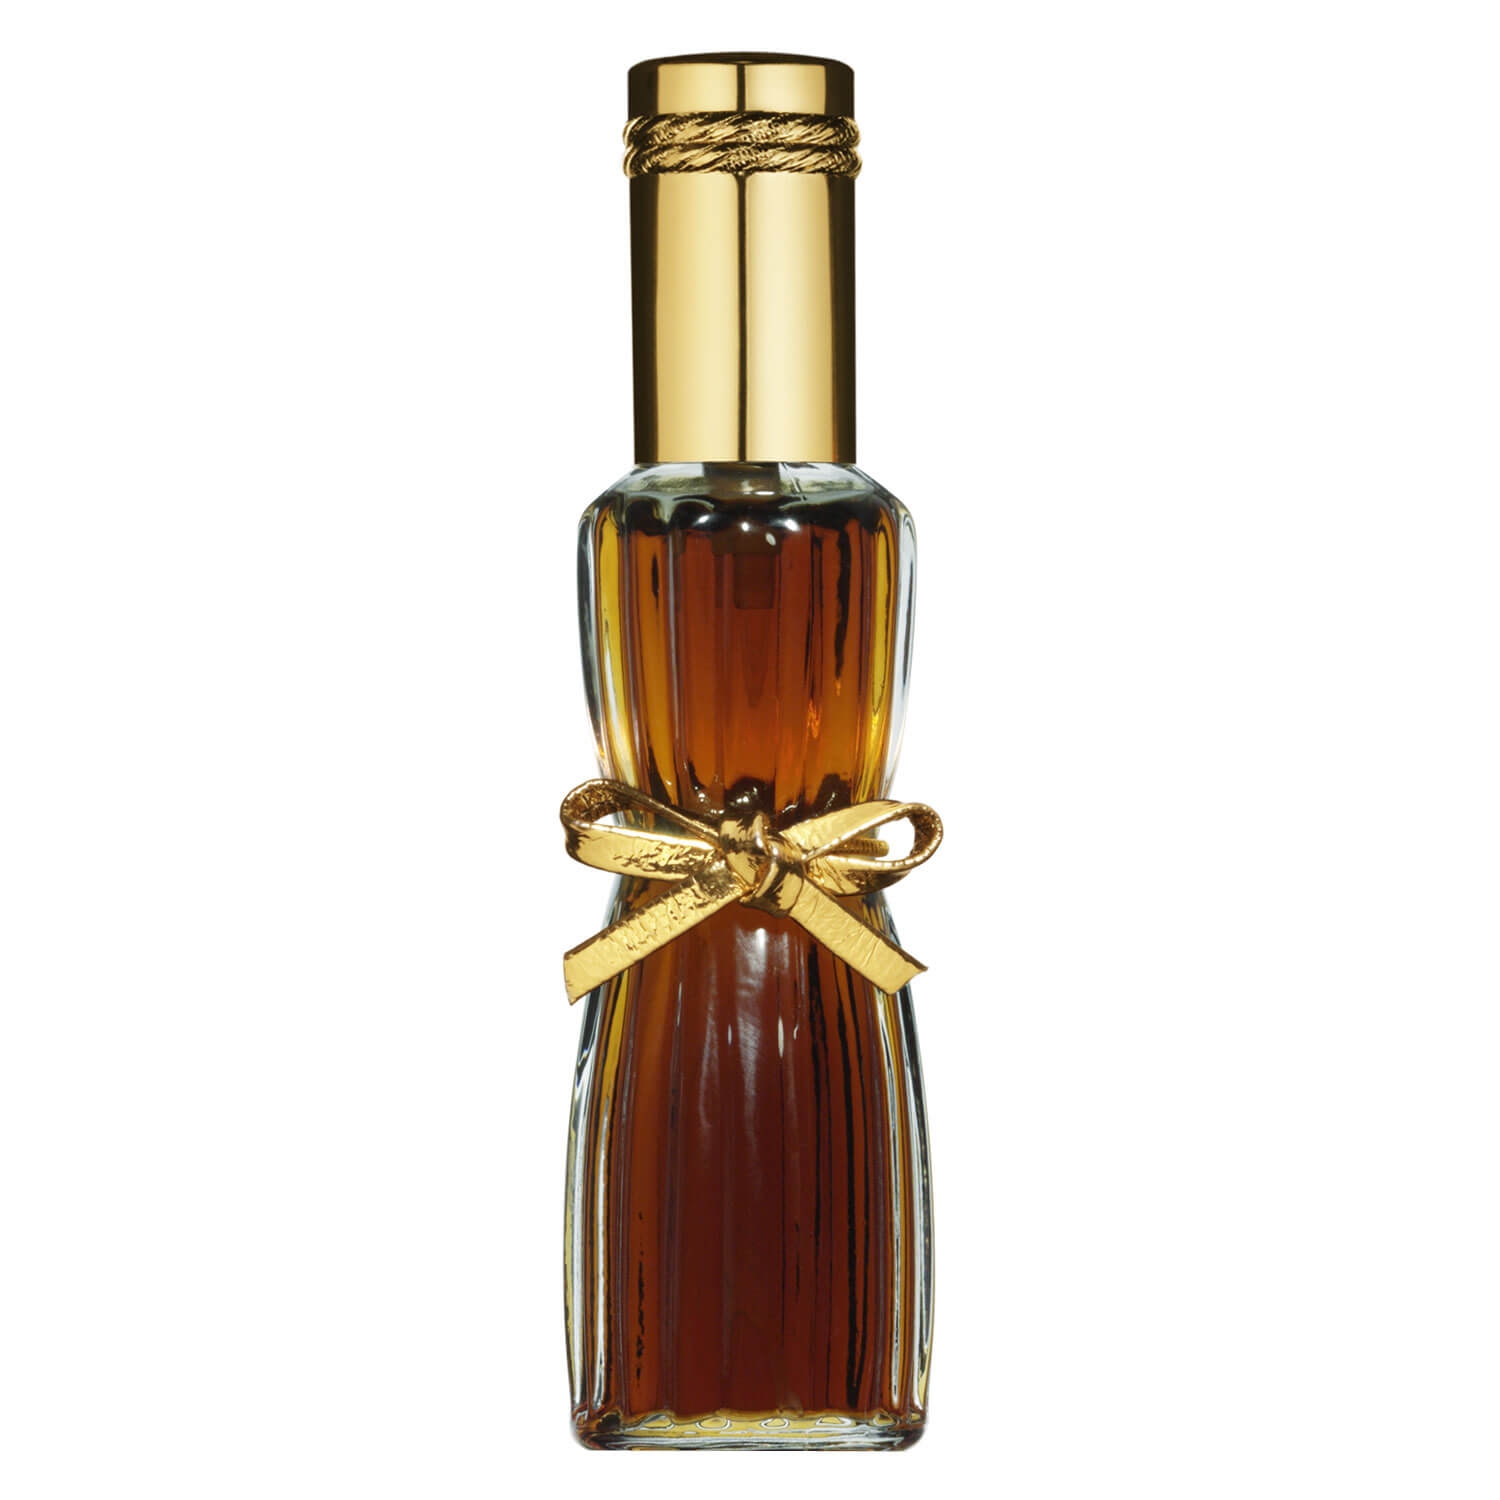 Product image from Youth-Dew - Eau de Parfum Spray